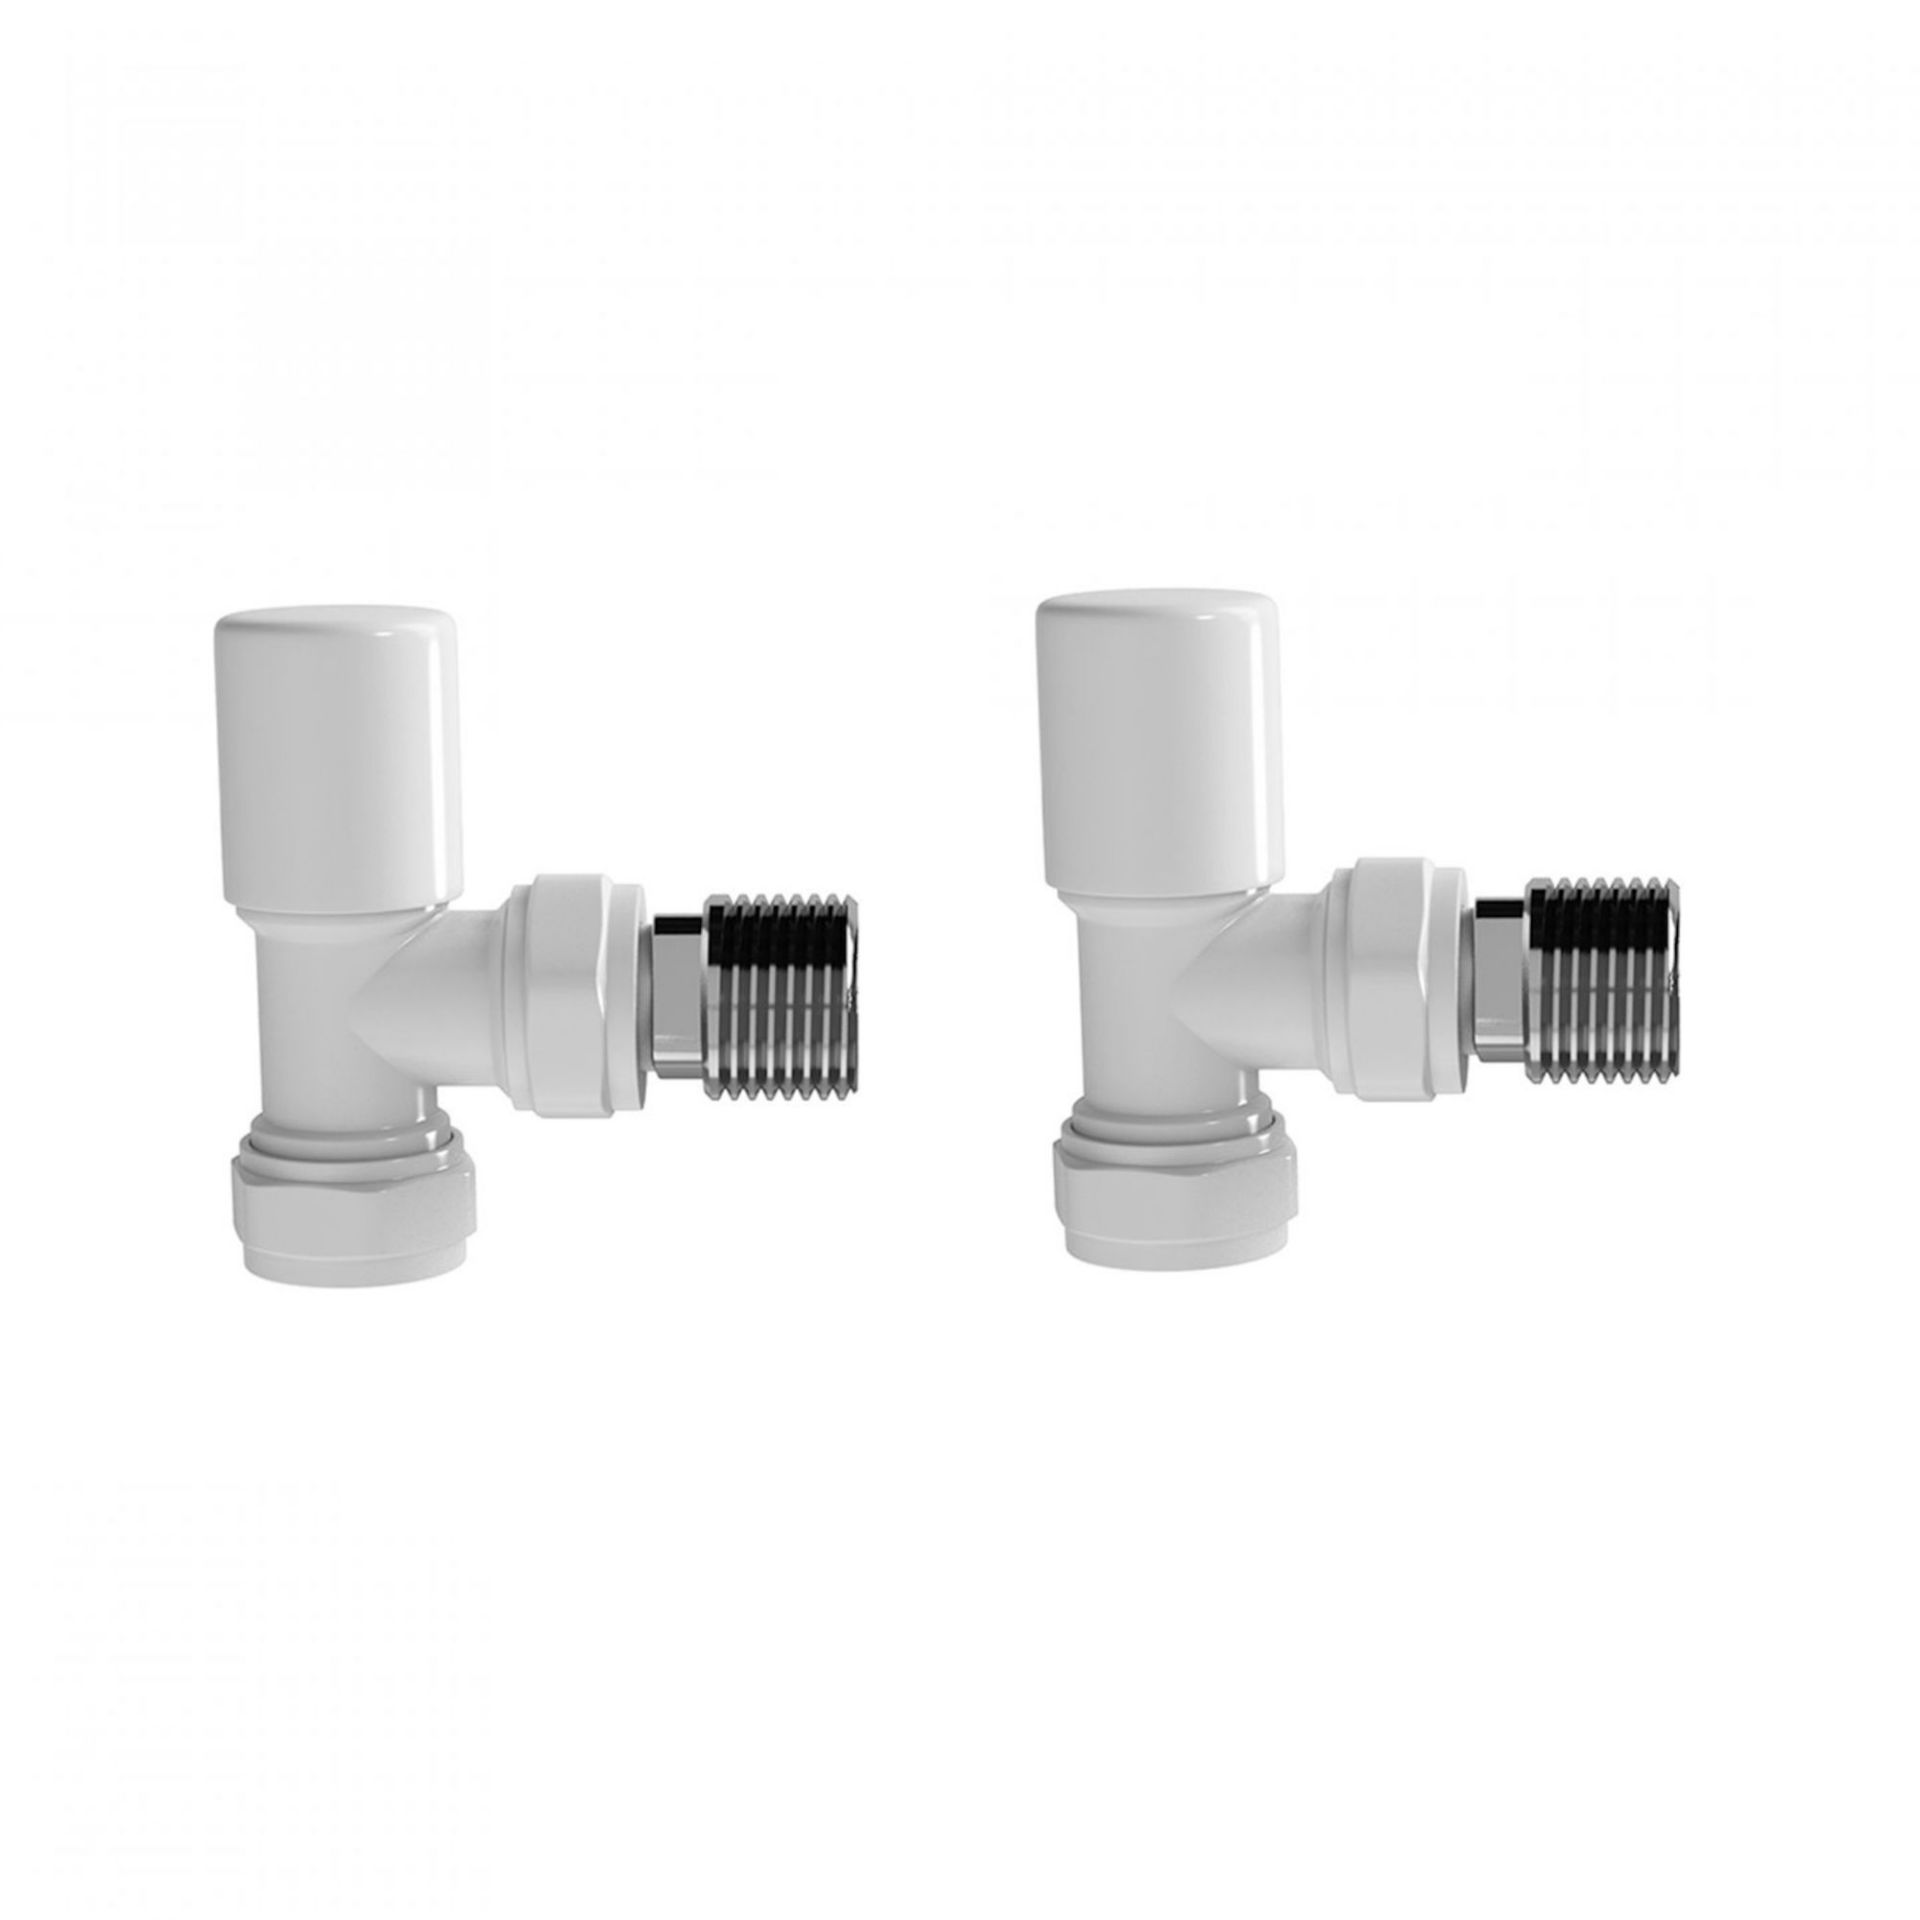 (YC230) 15mm Standard Connection Angled Gloss White Radiator Valves Solid brass construct Angled - Image 2 of 3